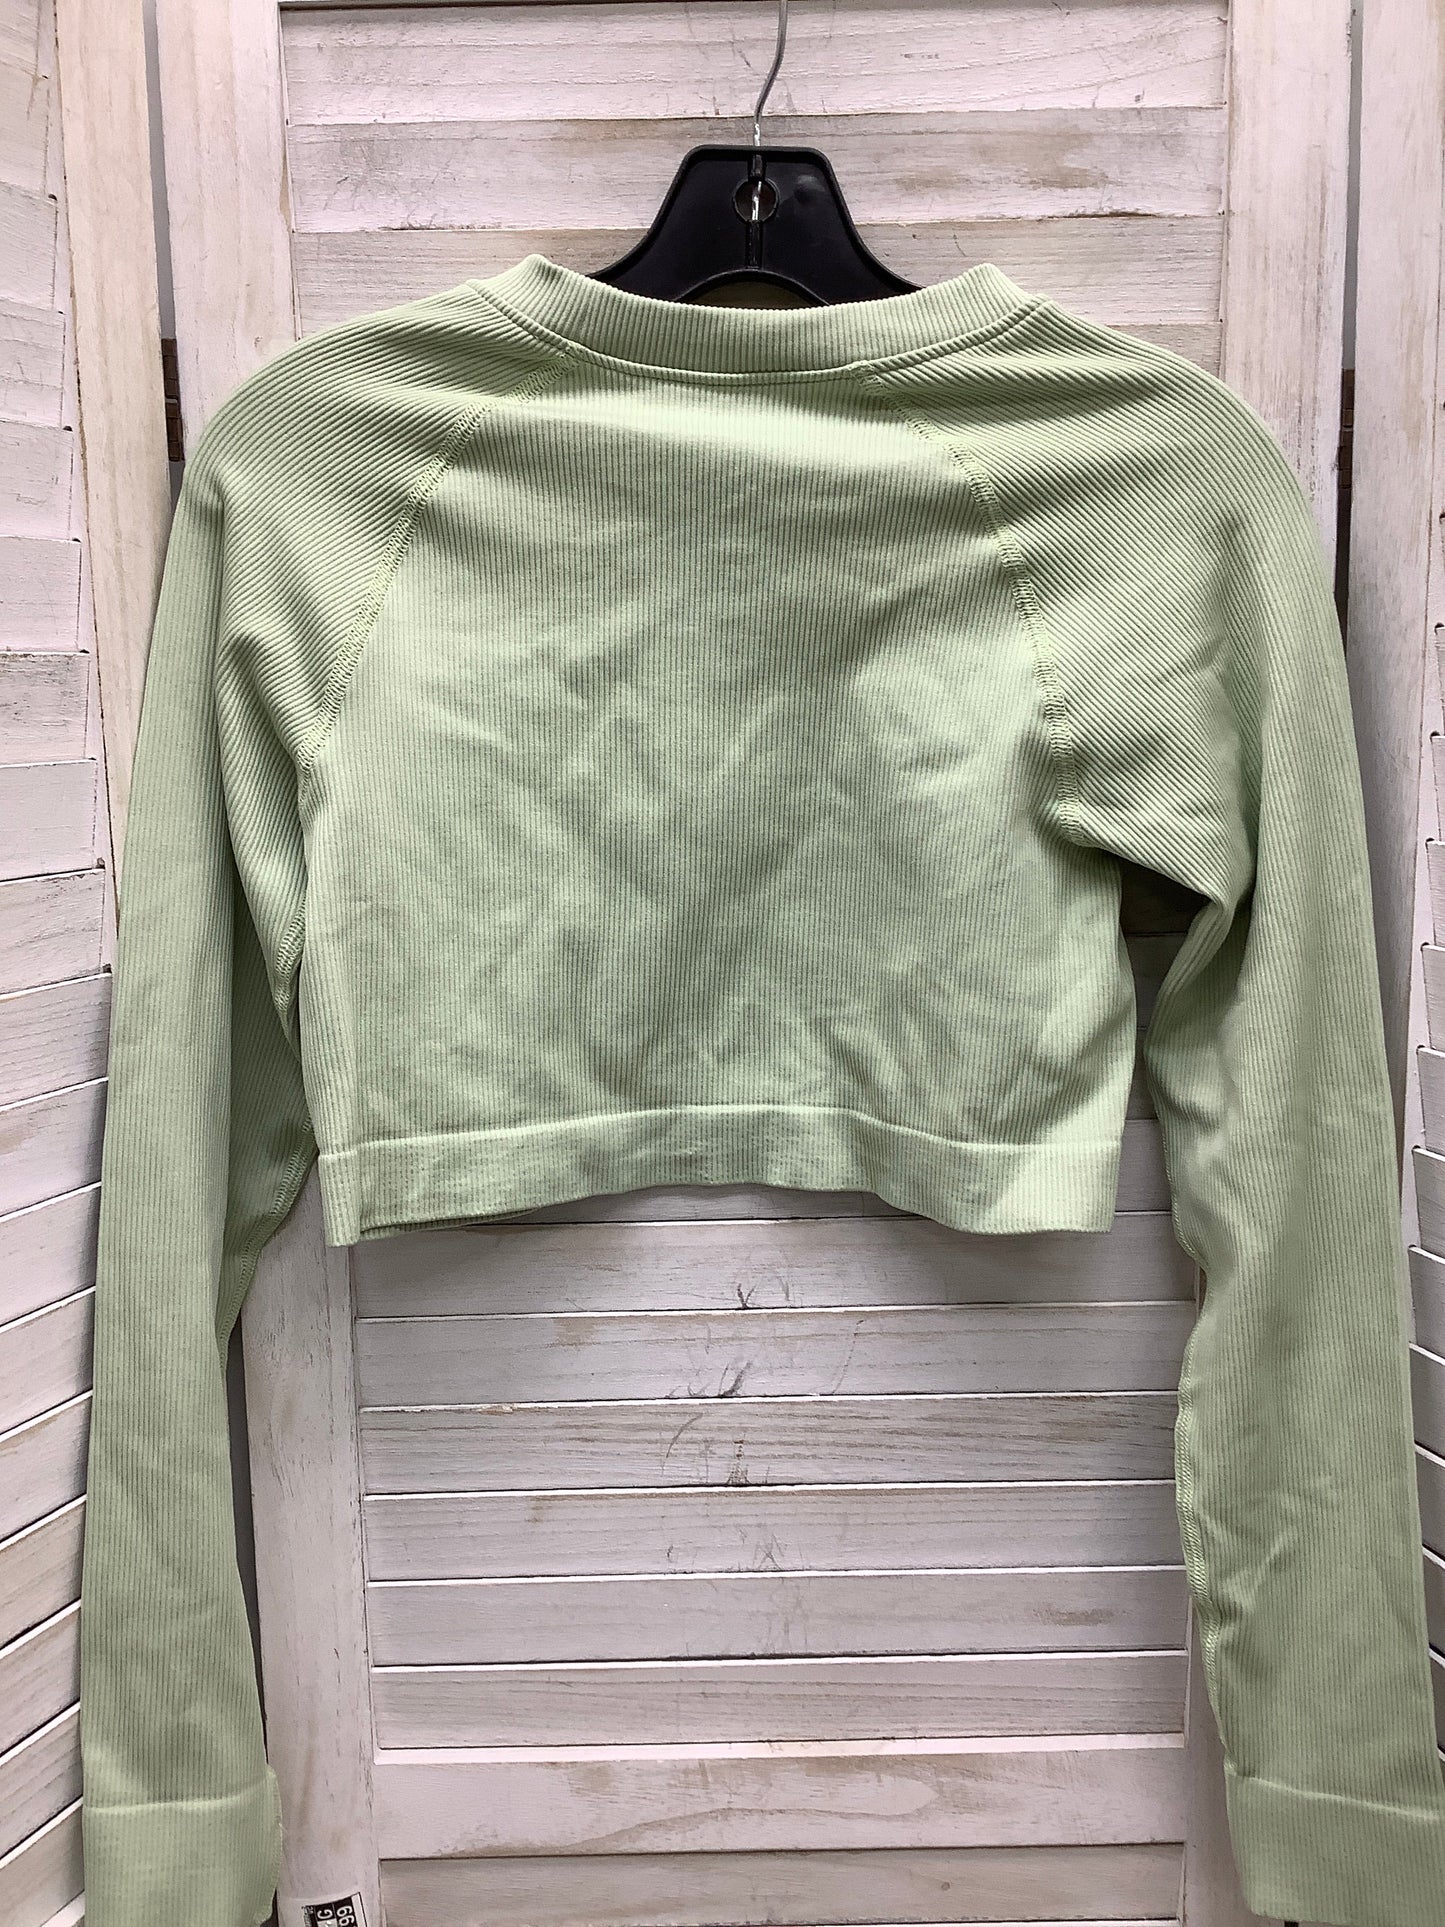 Green Athletic Top Long Sleeve Crewneck Clothes Mentor, Size L